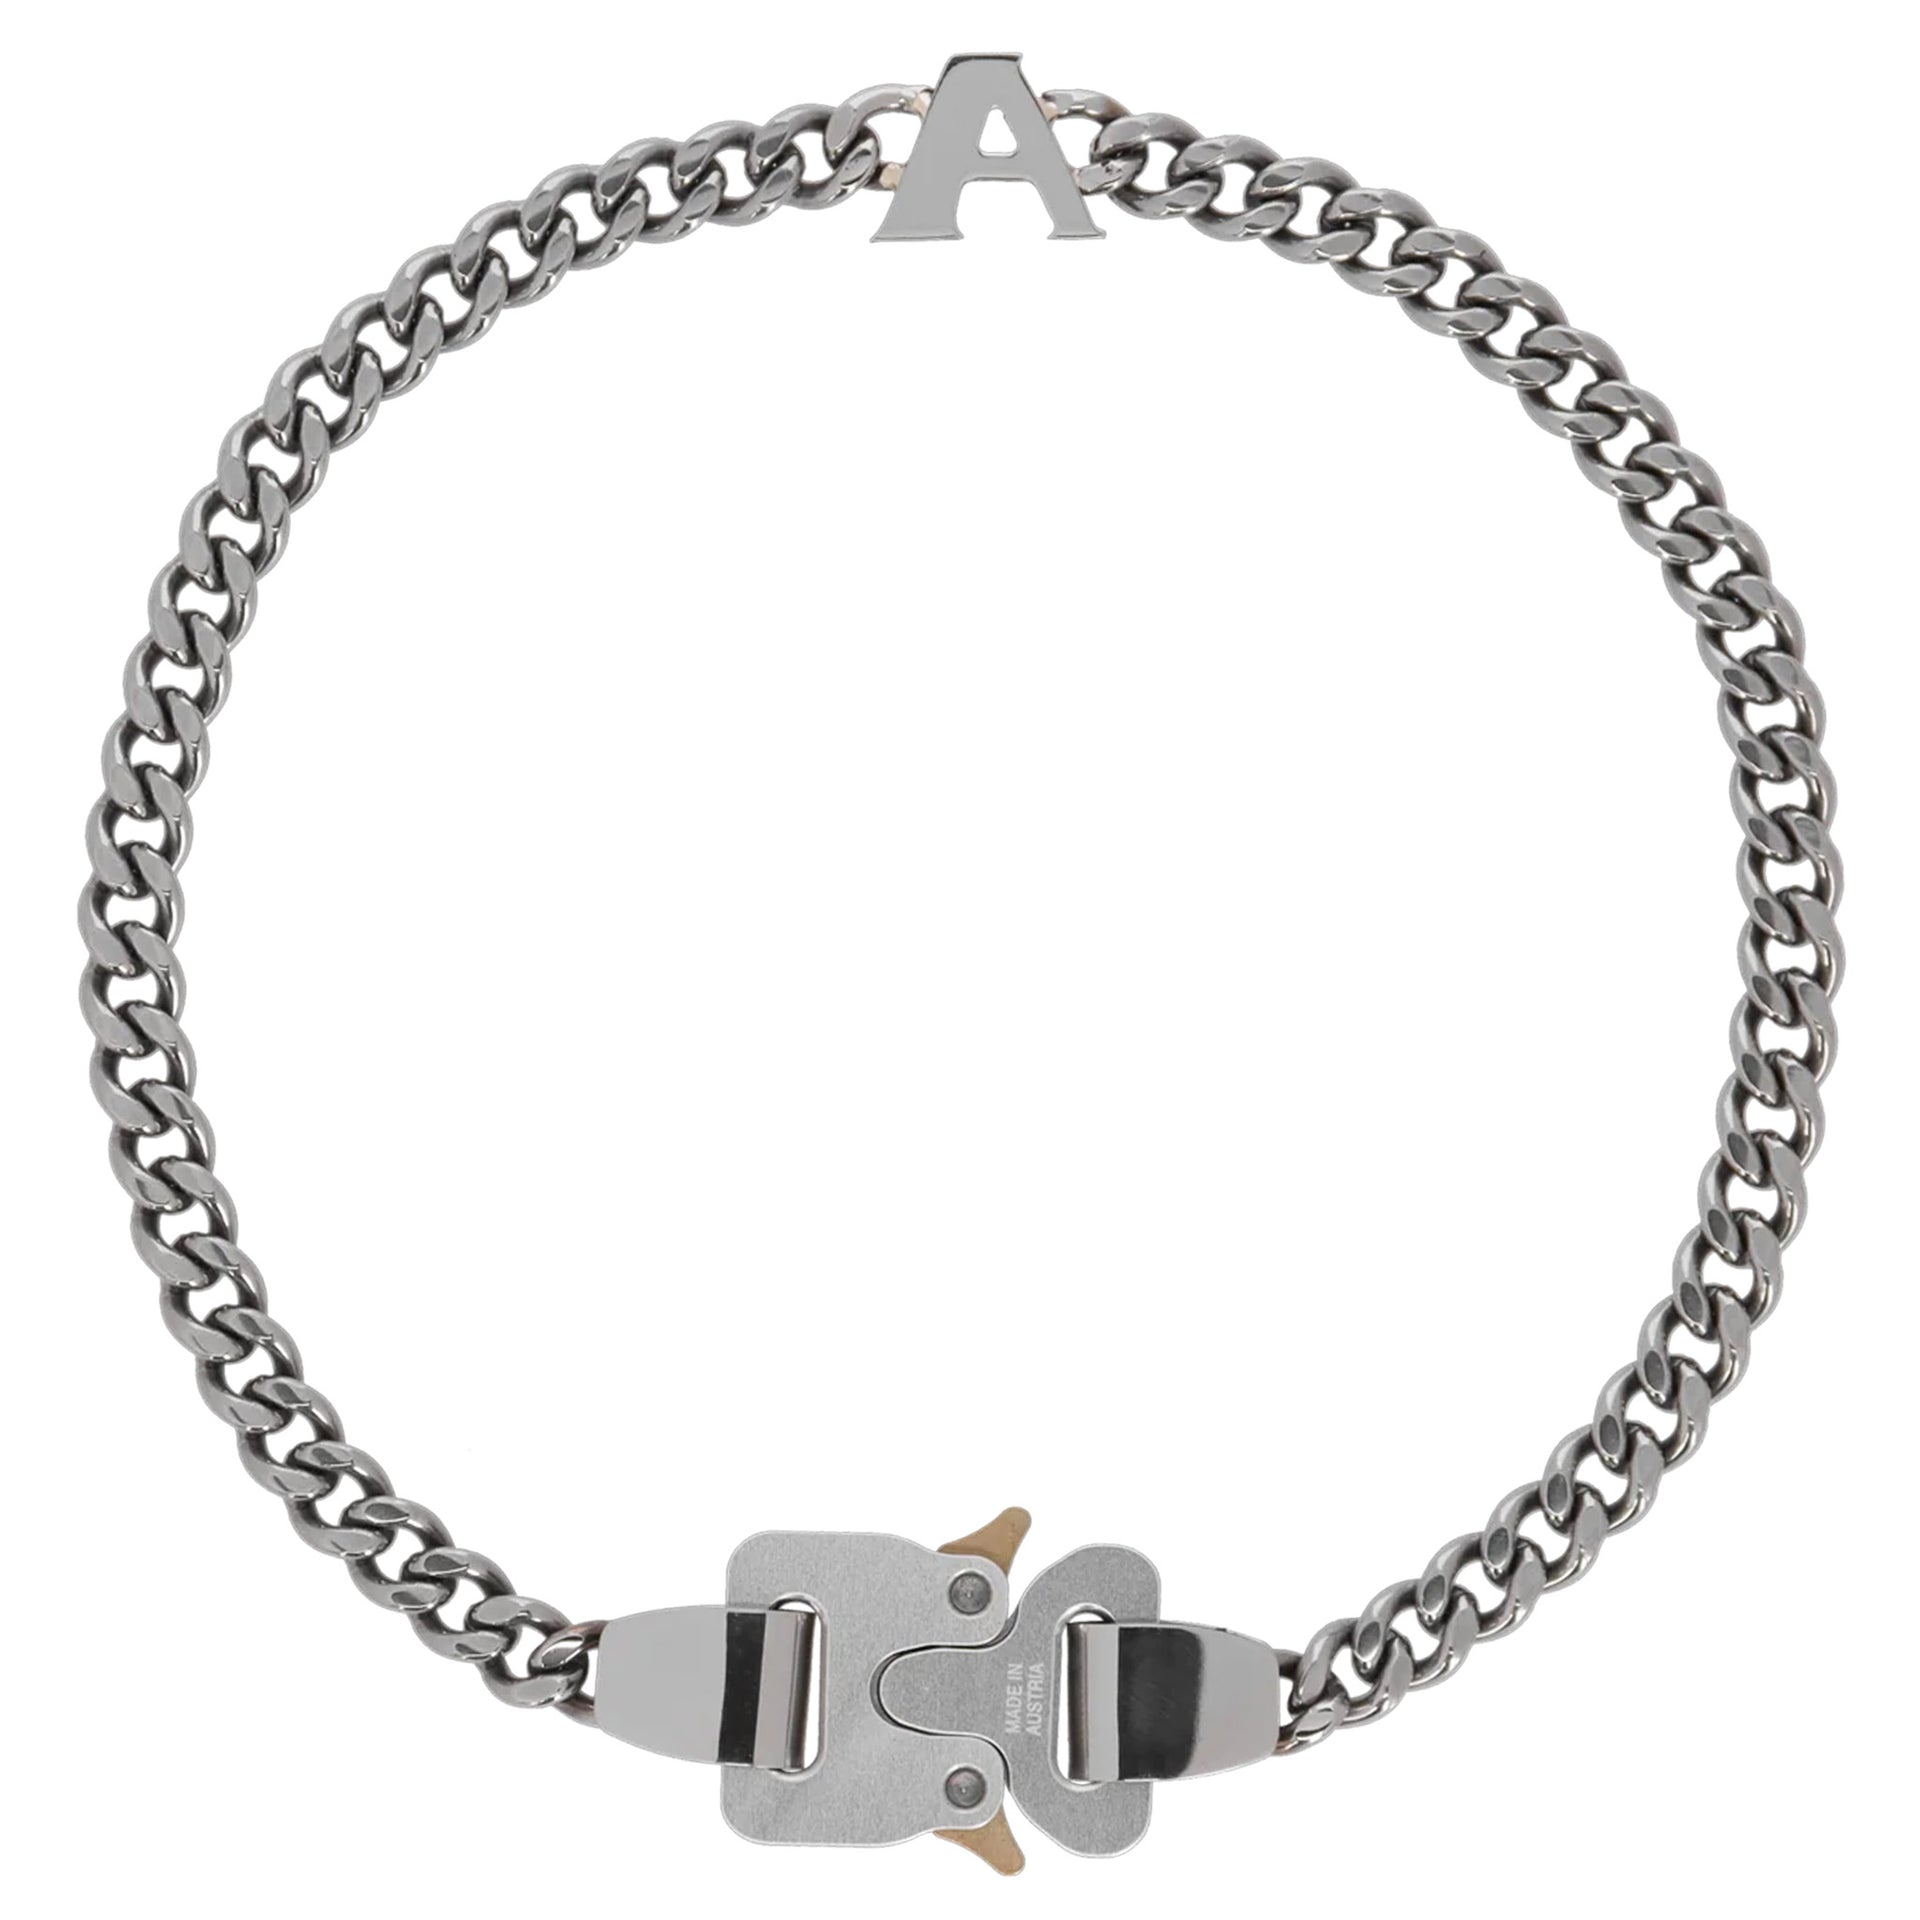 BUCKLE NECKLACE WITH CHARM / GRY0002:SILVER